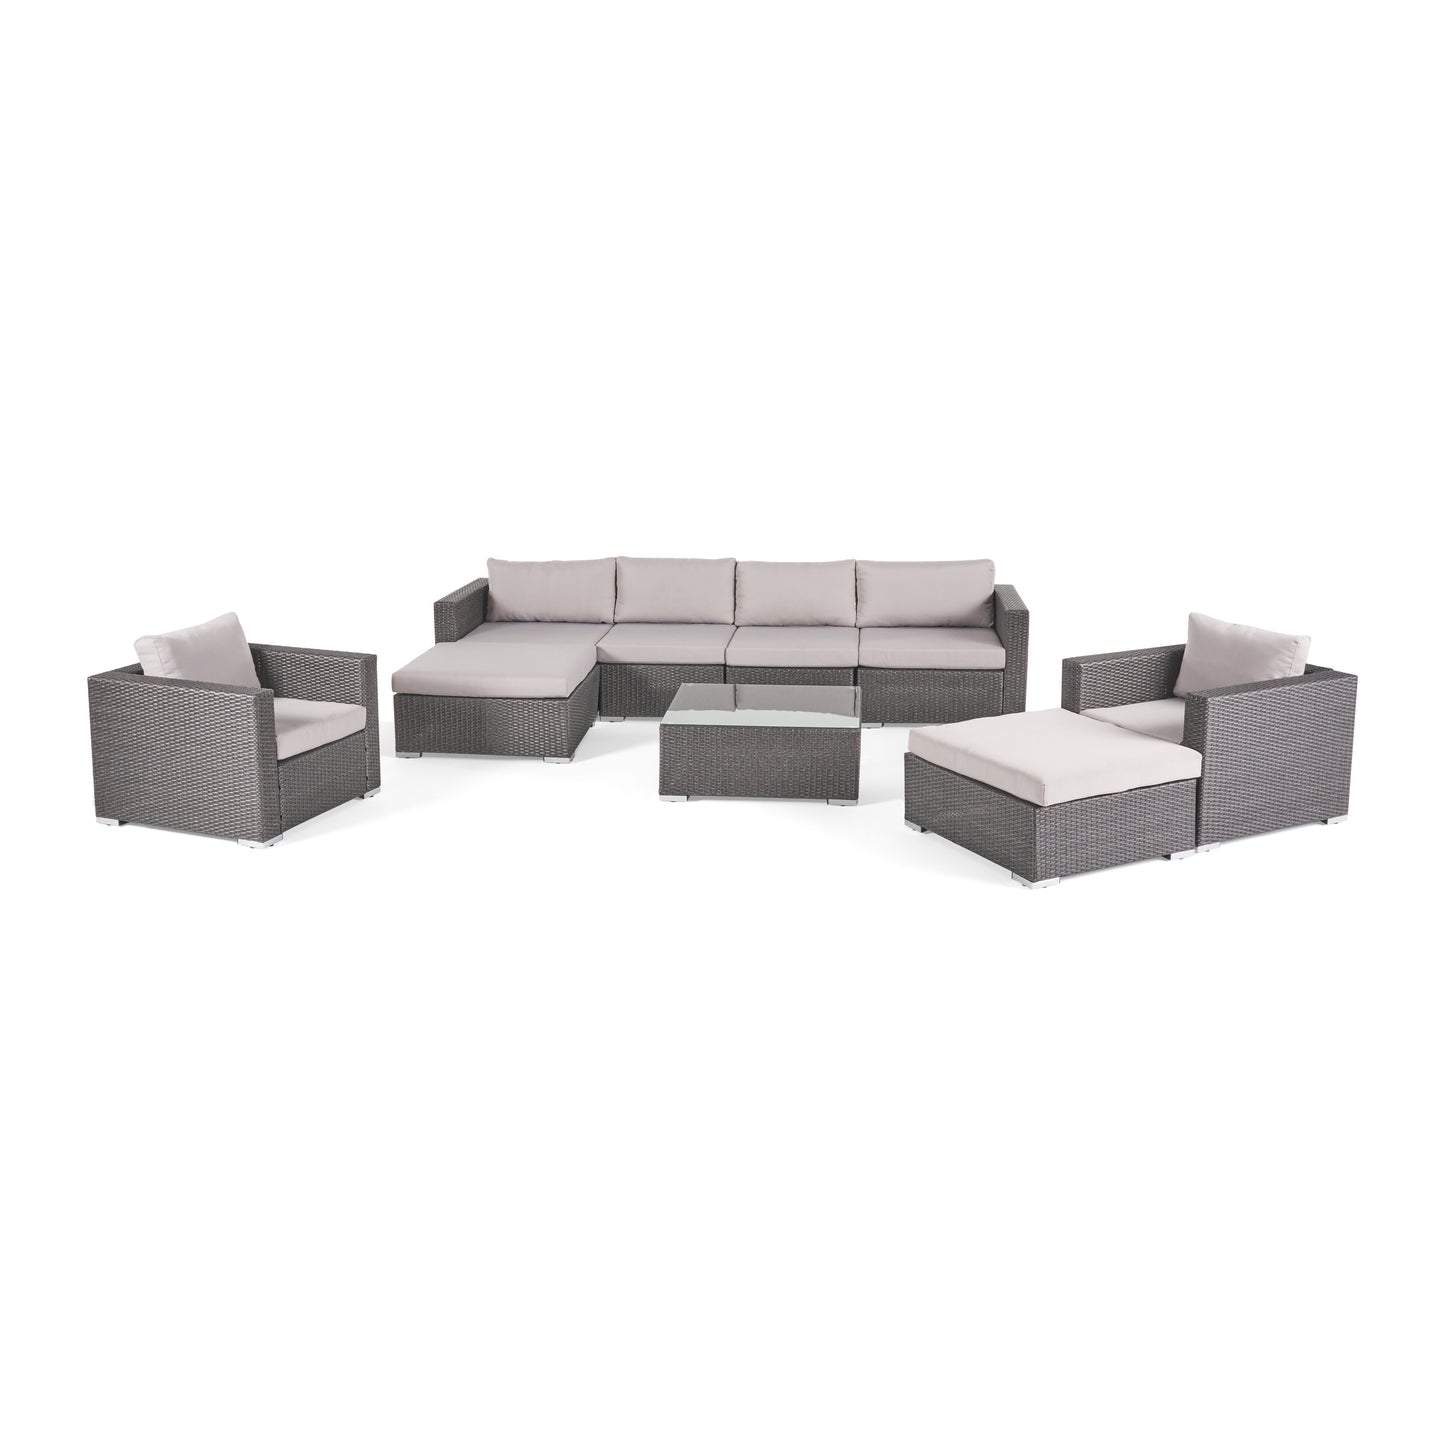 Francisco 9pc Outdoor Wicker Sectional Sofa Set w/ Cushions